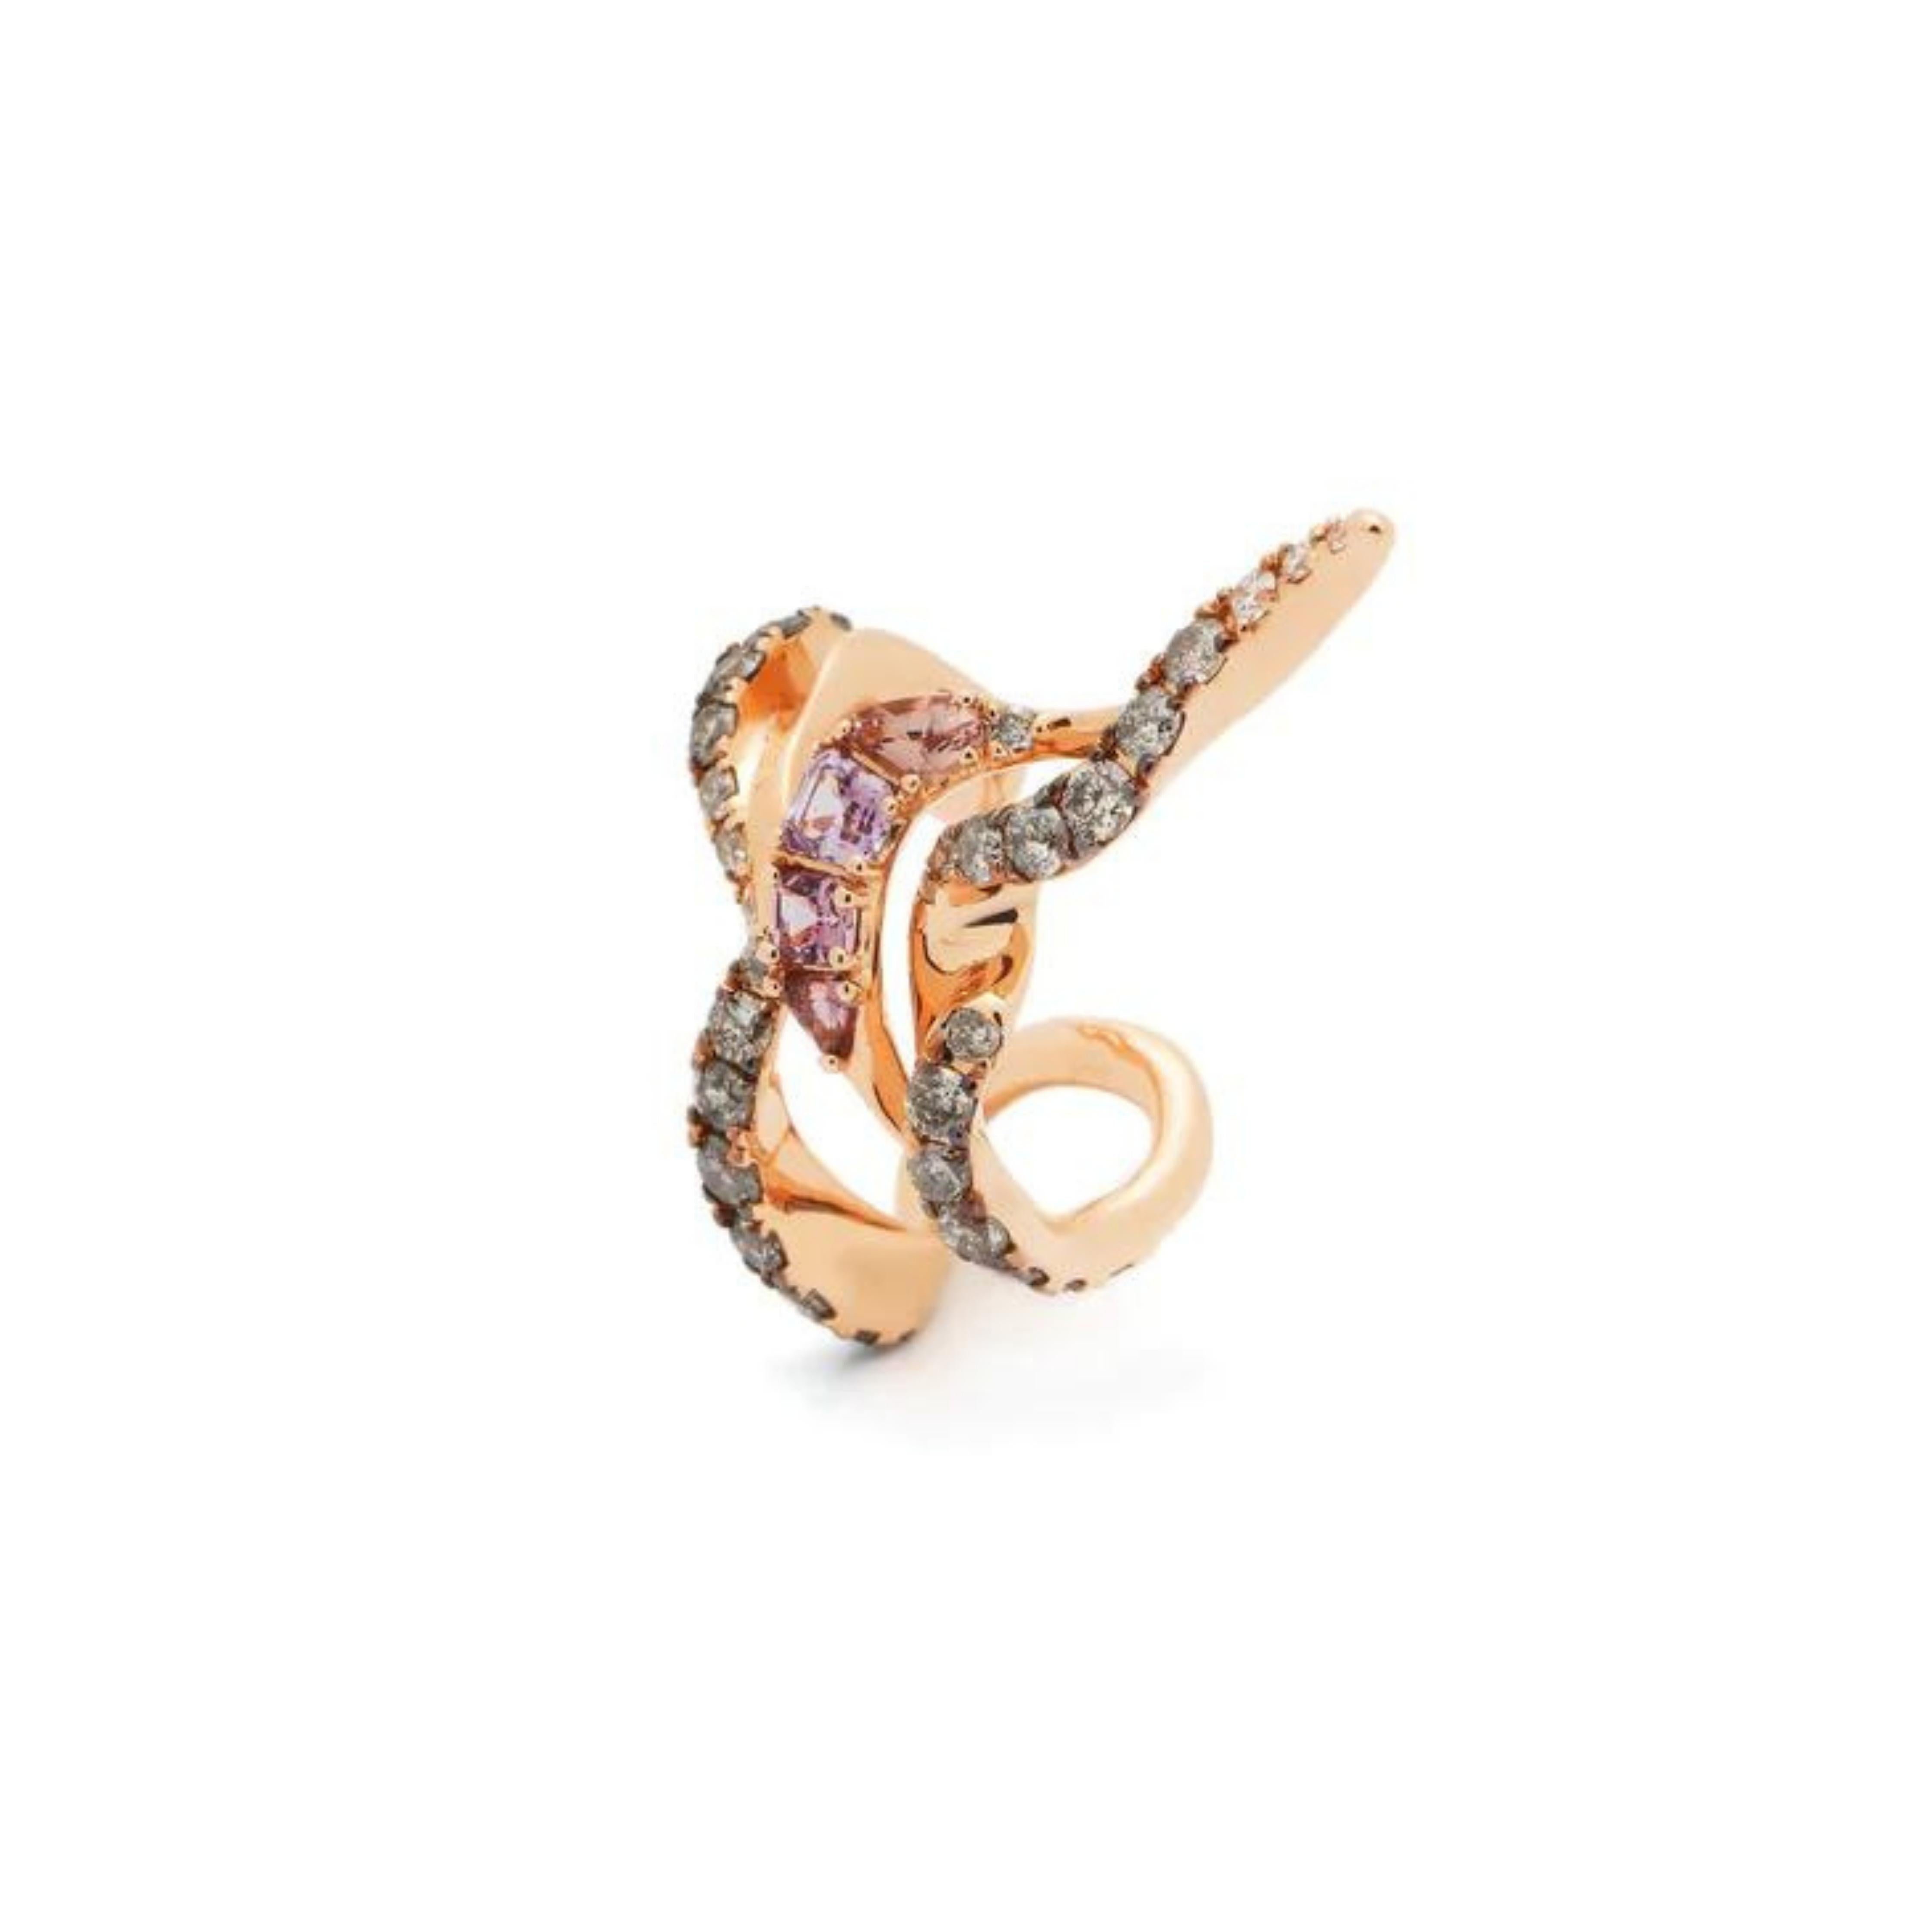 Bibi van der Velden Spark Violet Ear Hugger. Intricately woven in 18K rose gold to fit perfectly around the ear's edge.  Set with shades of white and grey diamonds, white sapphires, and grey spinels